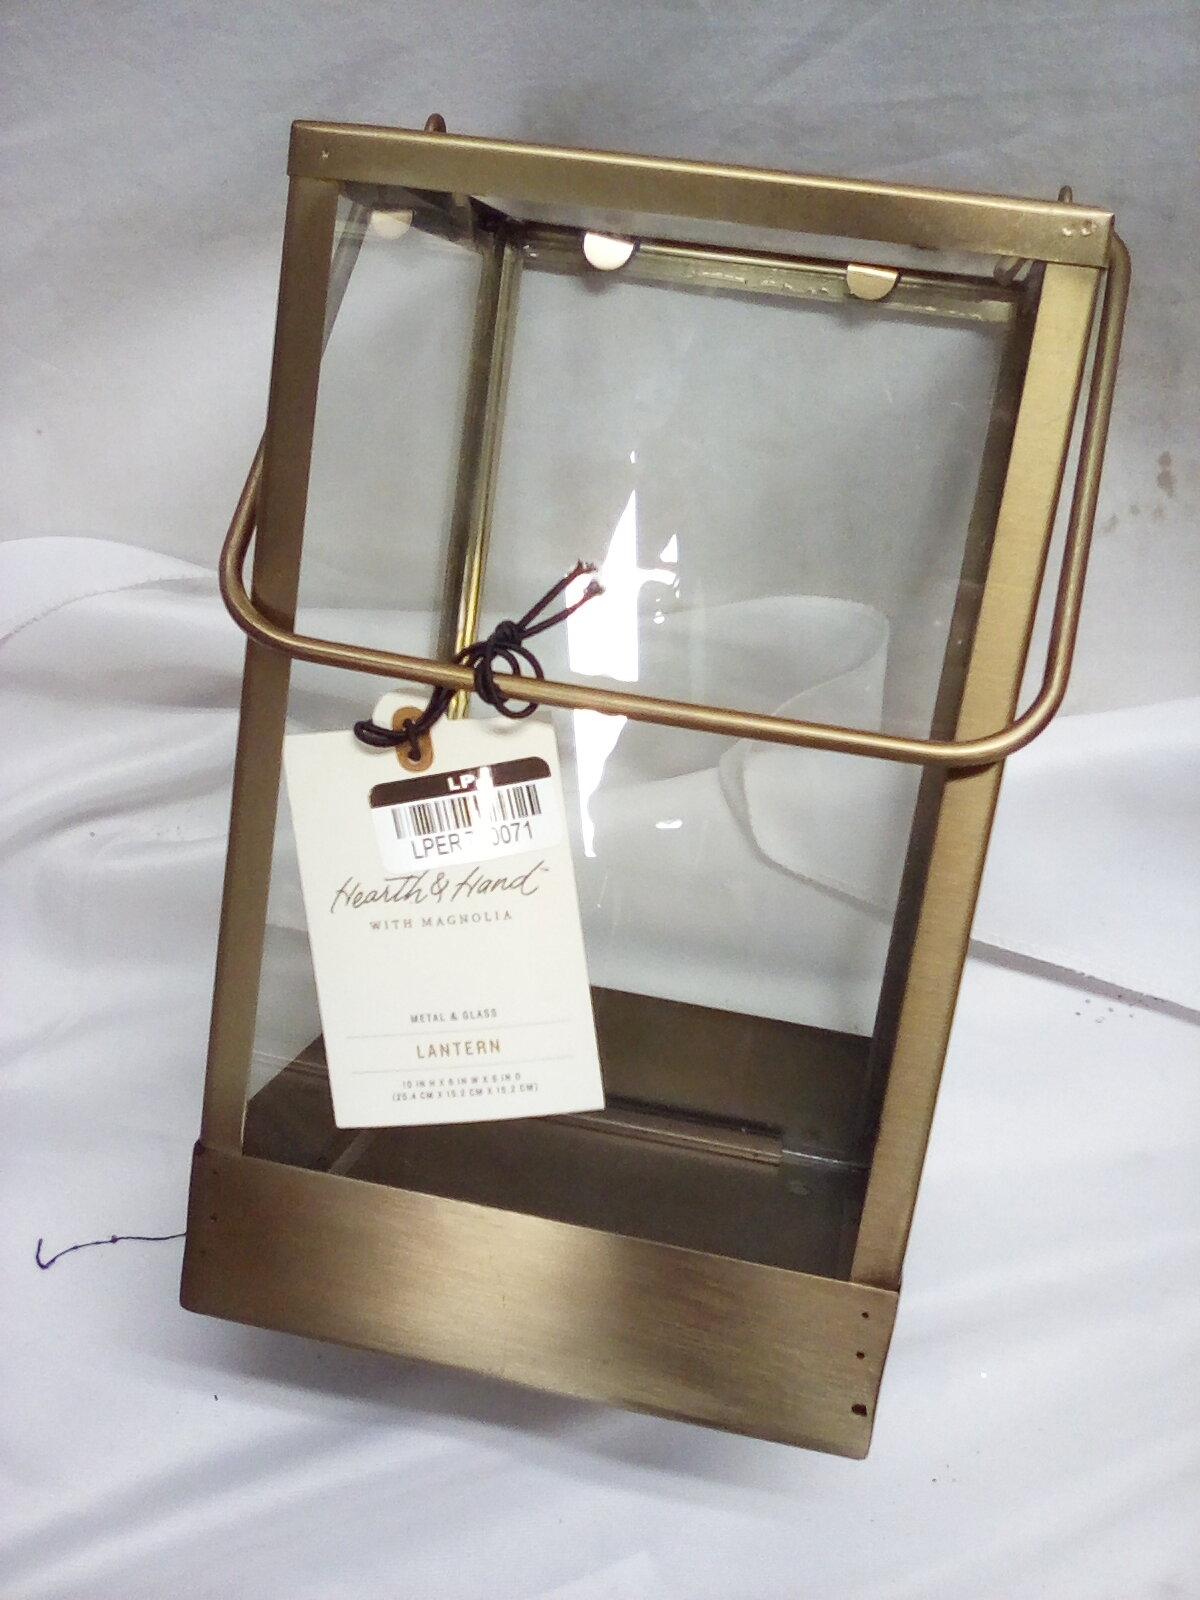 Metal and Glass Lantern MSRP 29.99